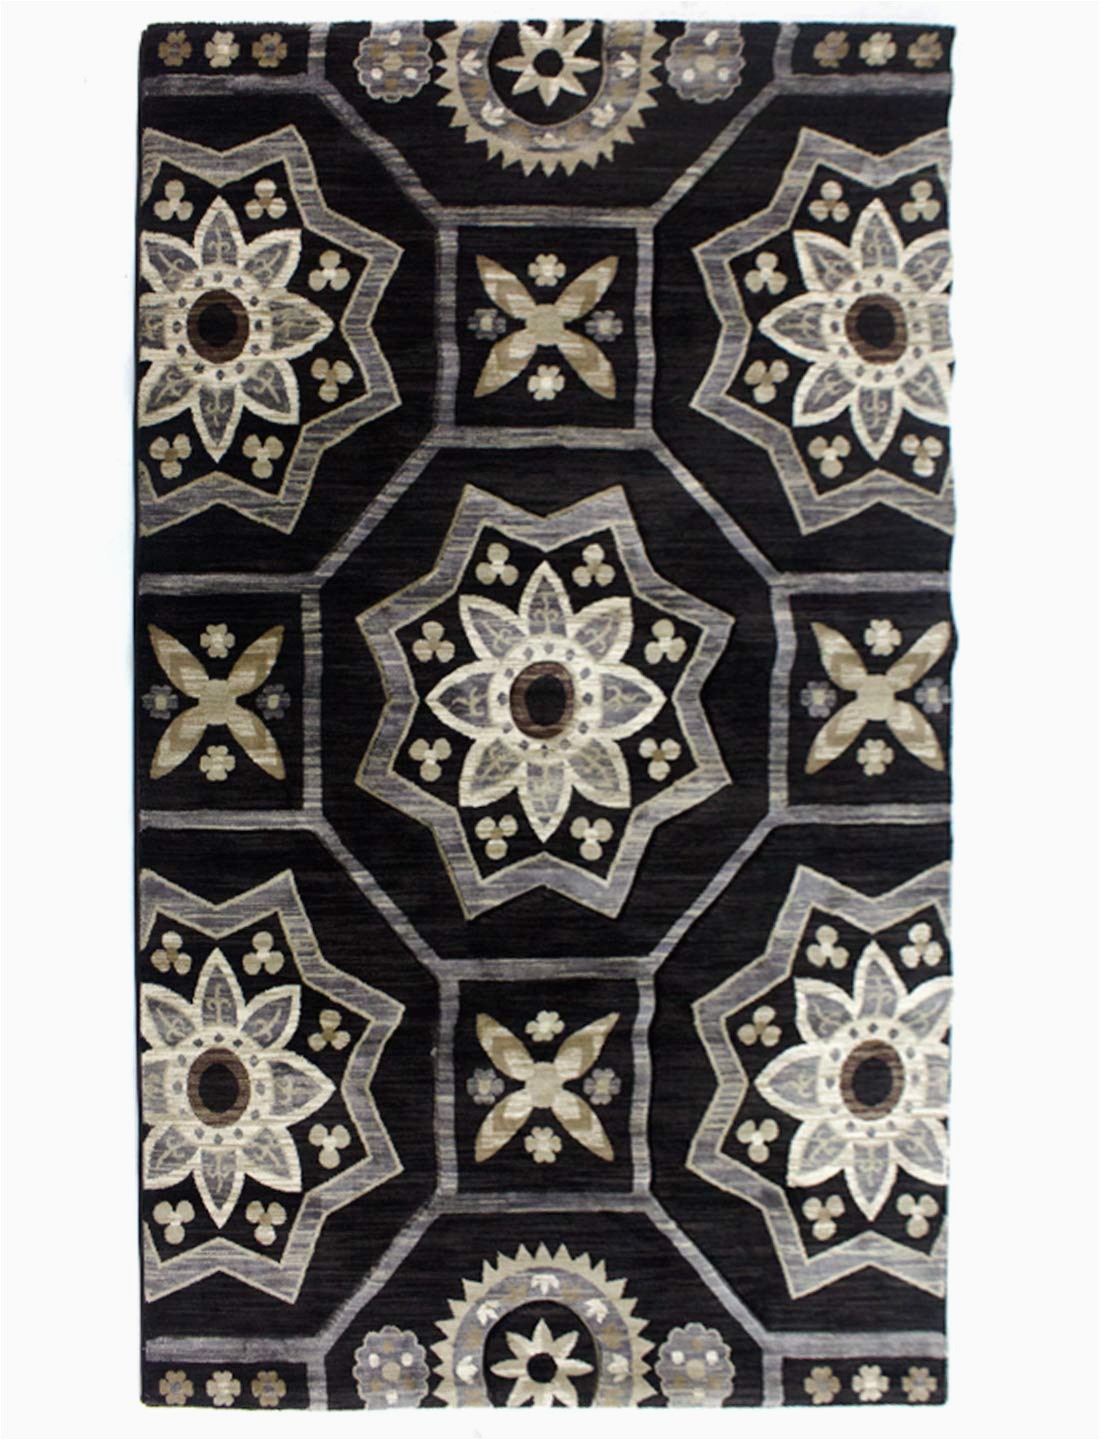 60 X 60 area Rug Buy Obsessions Bella Turkish area Rug 60 X 150 Cm Line at